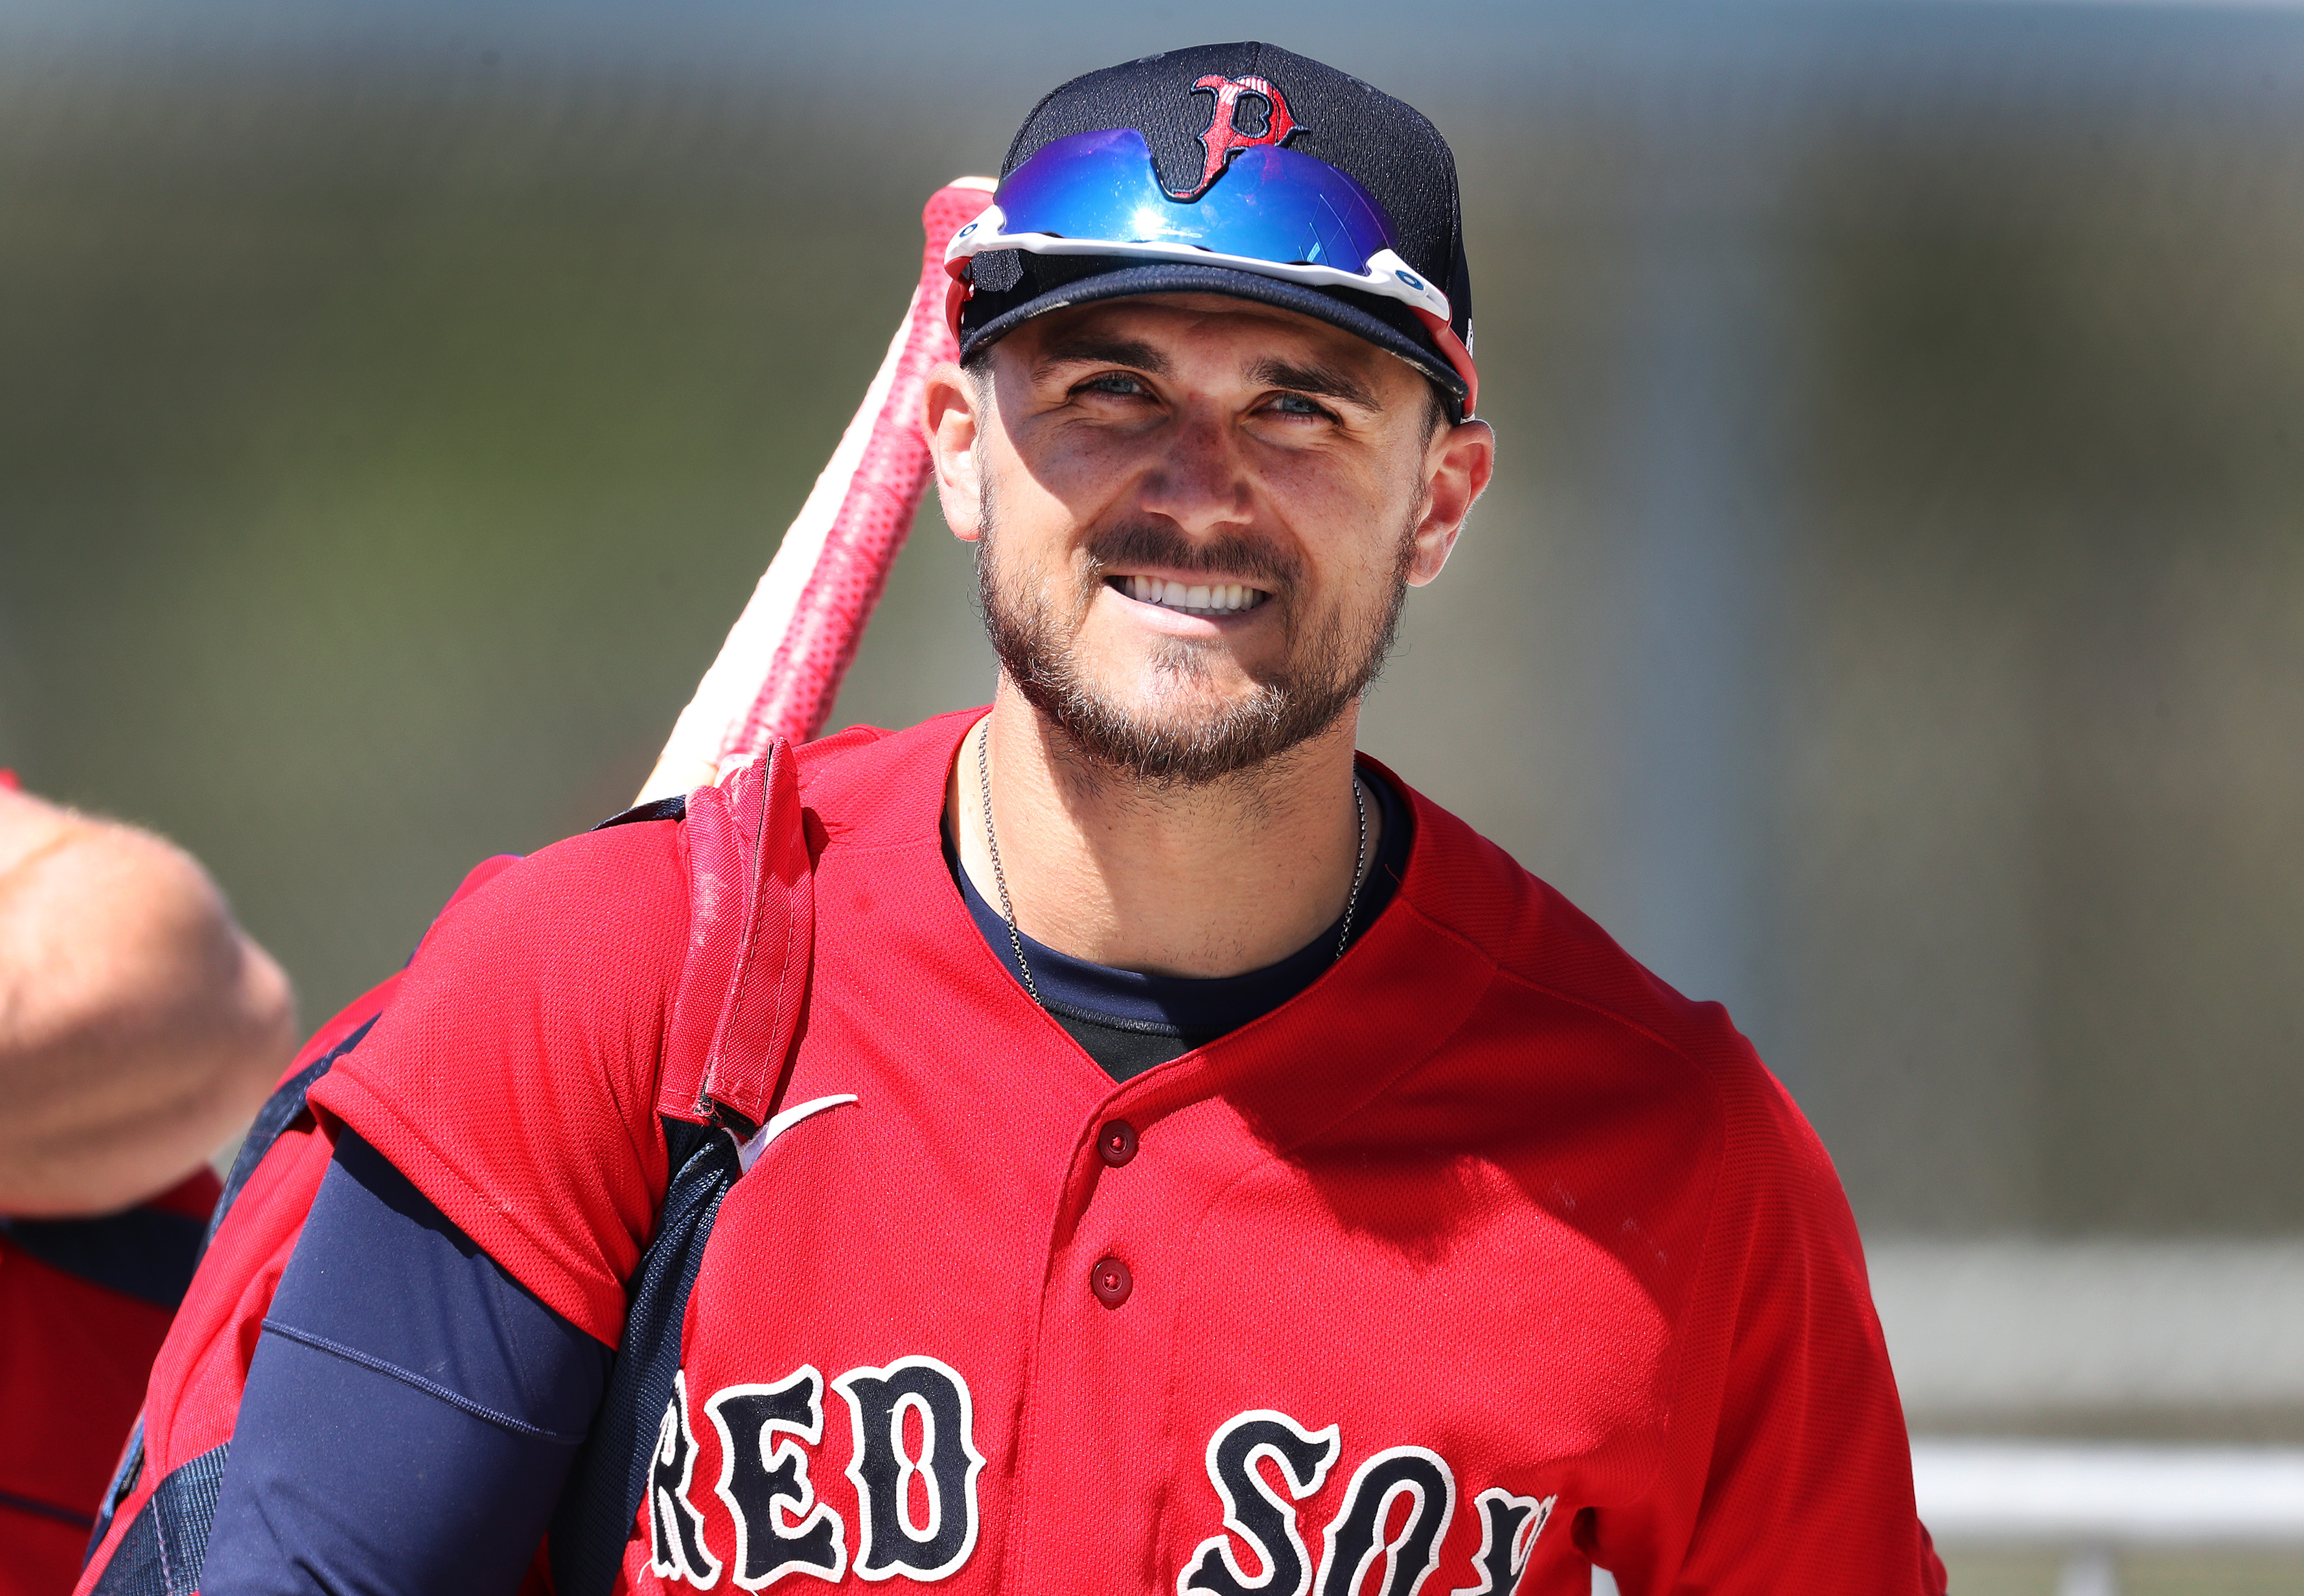 Introducing the 2021 Red Sox roster - The Boston Globe